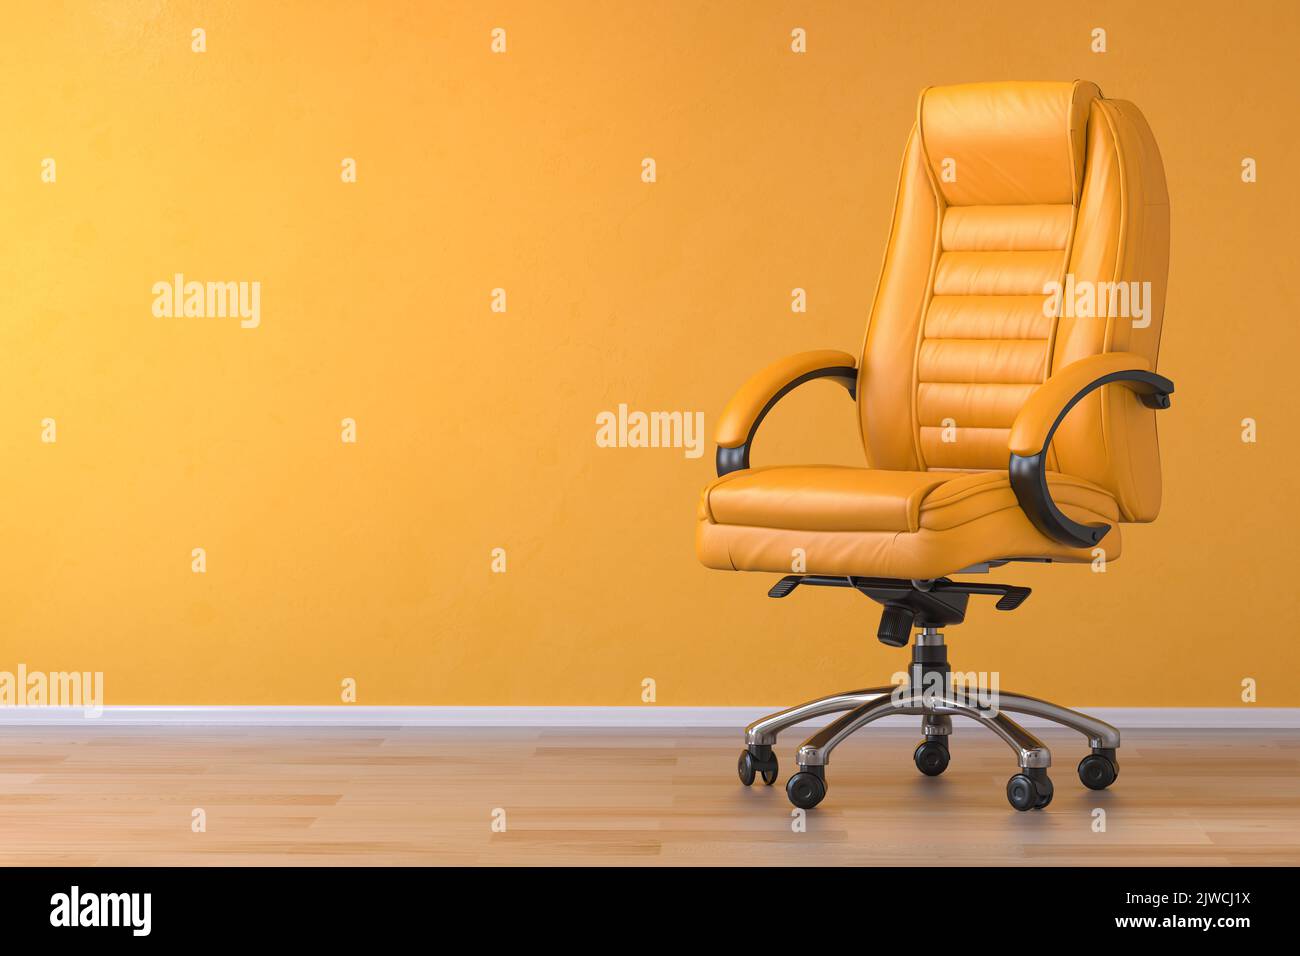 Yellow office chair in yellow interior with space for text. 3d illustration Stock Photo